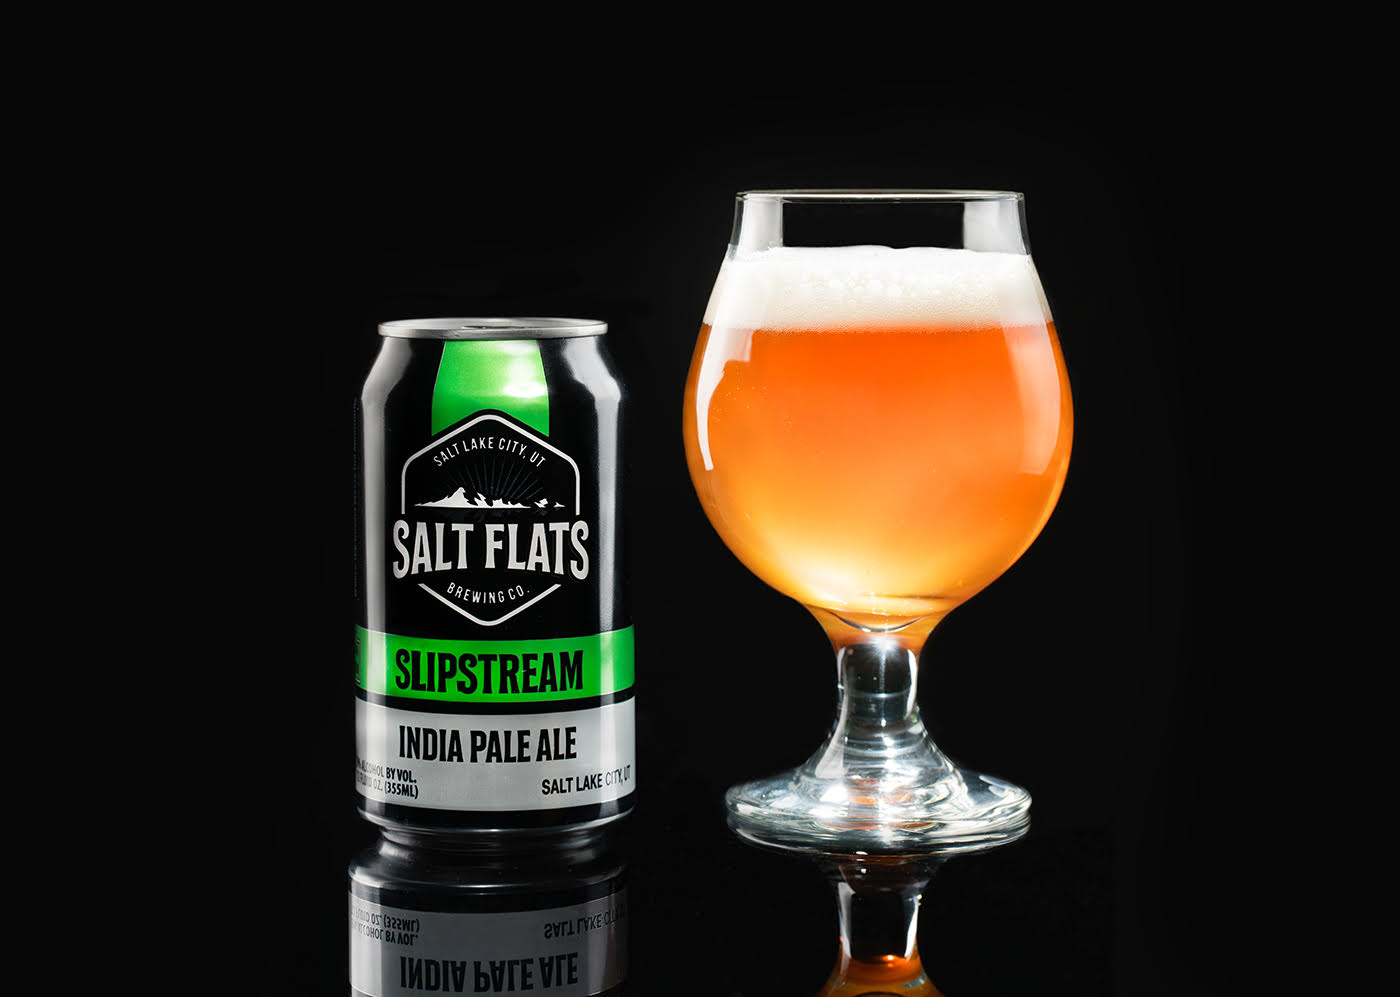 Salt Flats Brewing Co.'s Slipstream India Pale Ale contains classic hints of pine, bready sweetness and the aroma of an inner peel from a ripened orange.